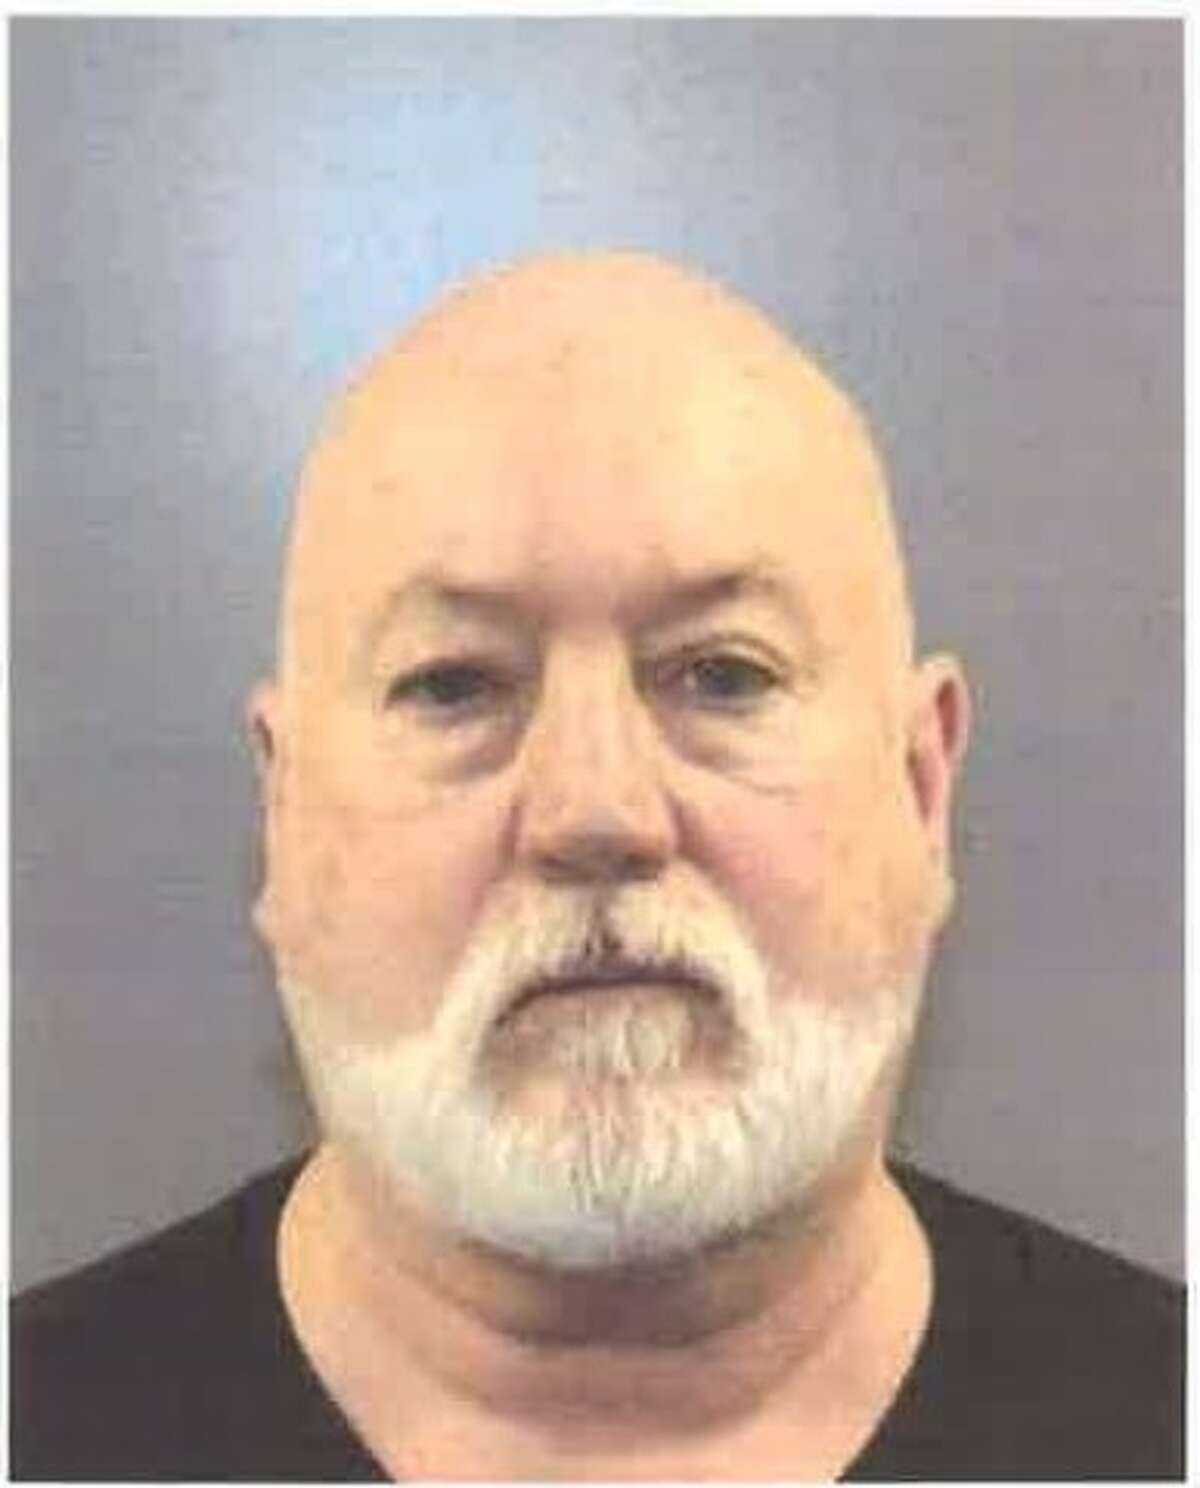 Kevin M Daigneault, 62, of East Lyme, has been accused of seriously injuring a person in a hammer attack, police said.